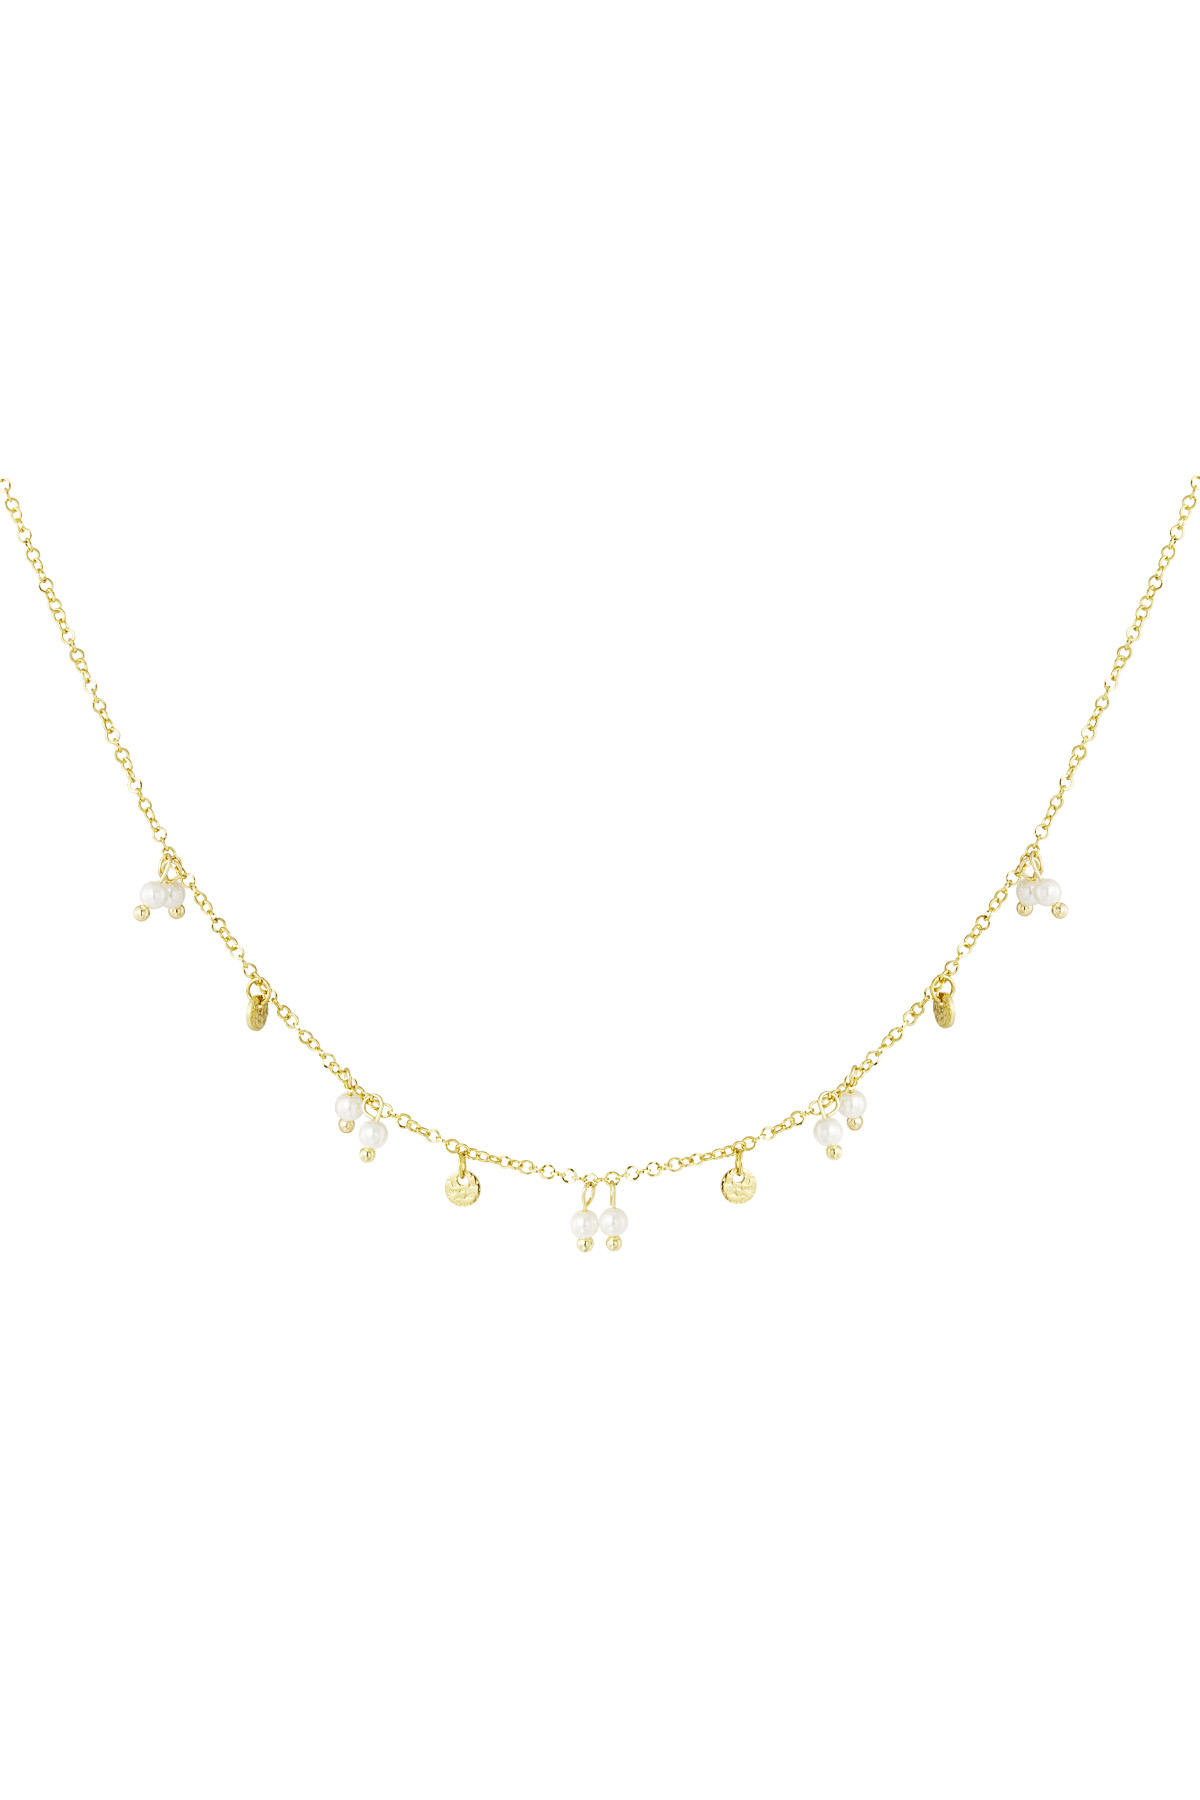 Necklace pearls and charms - gold h5 